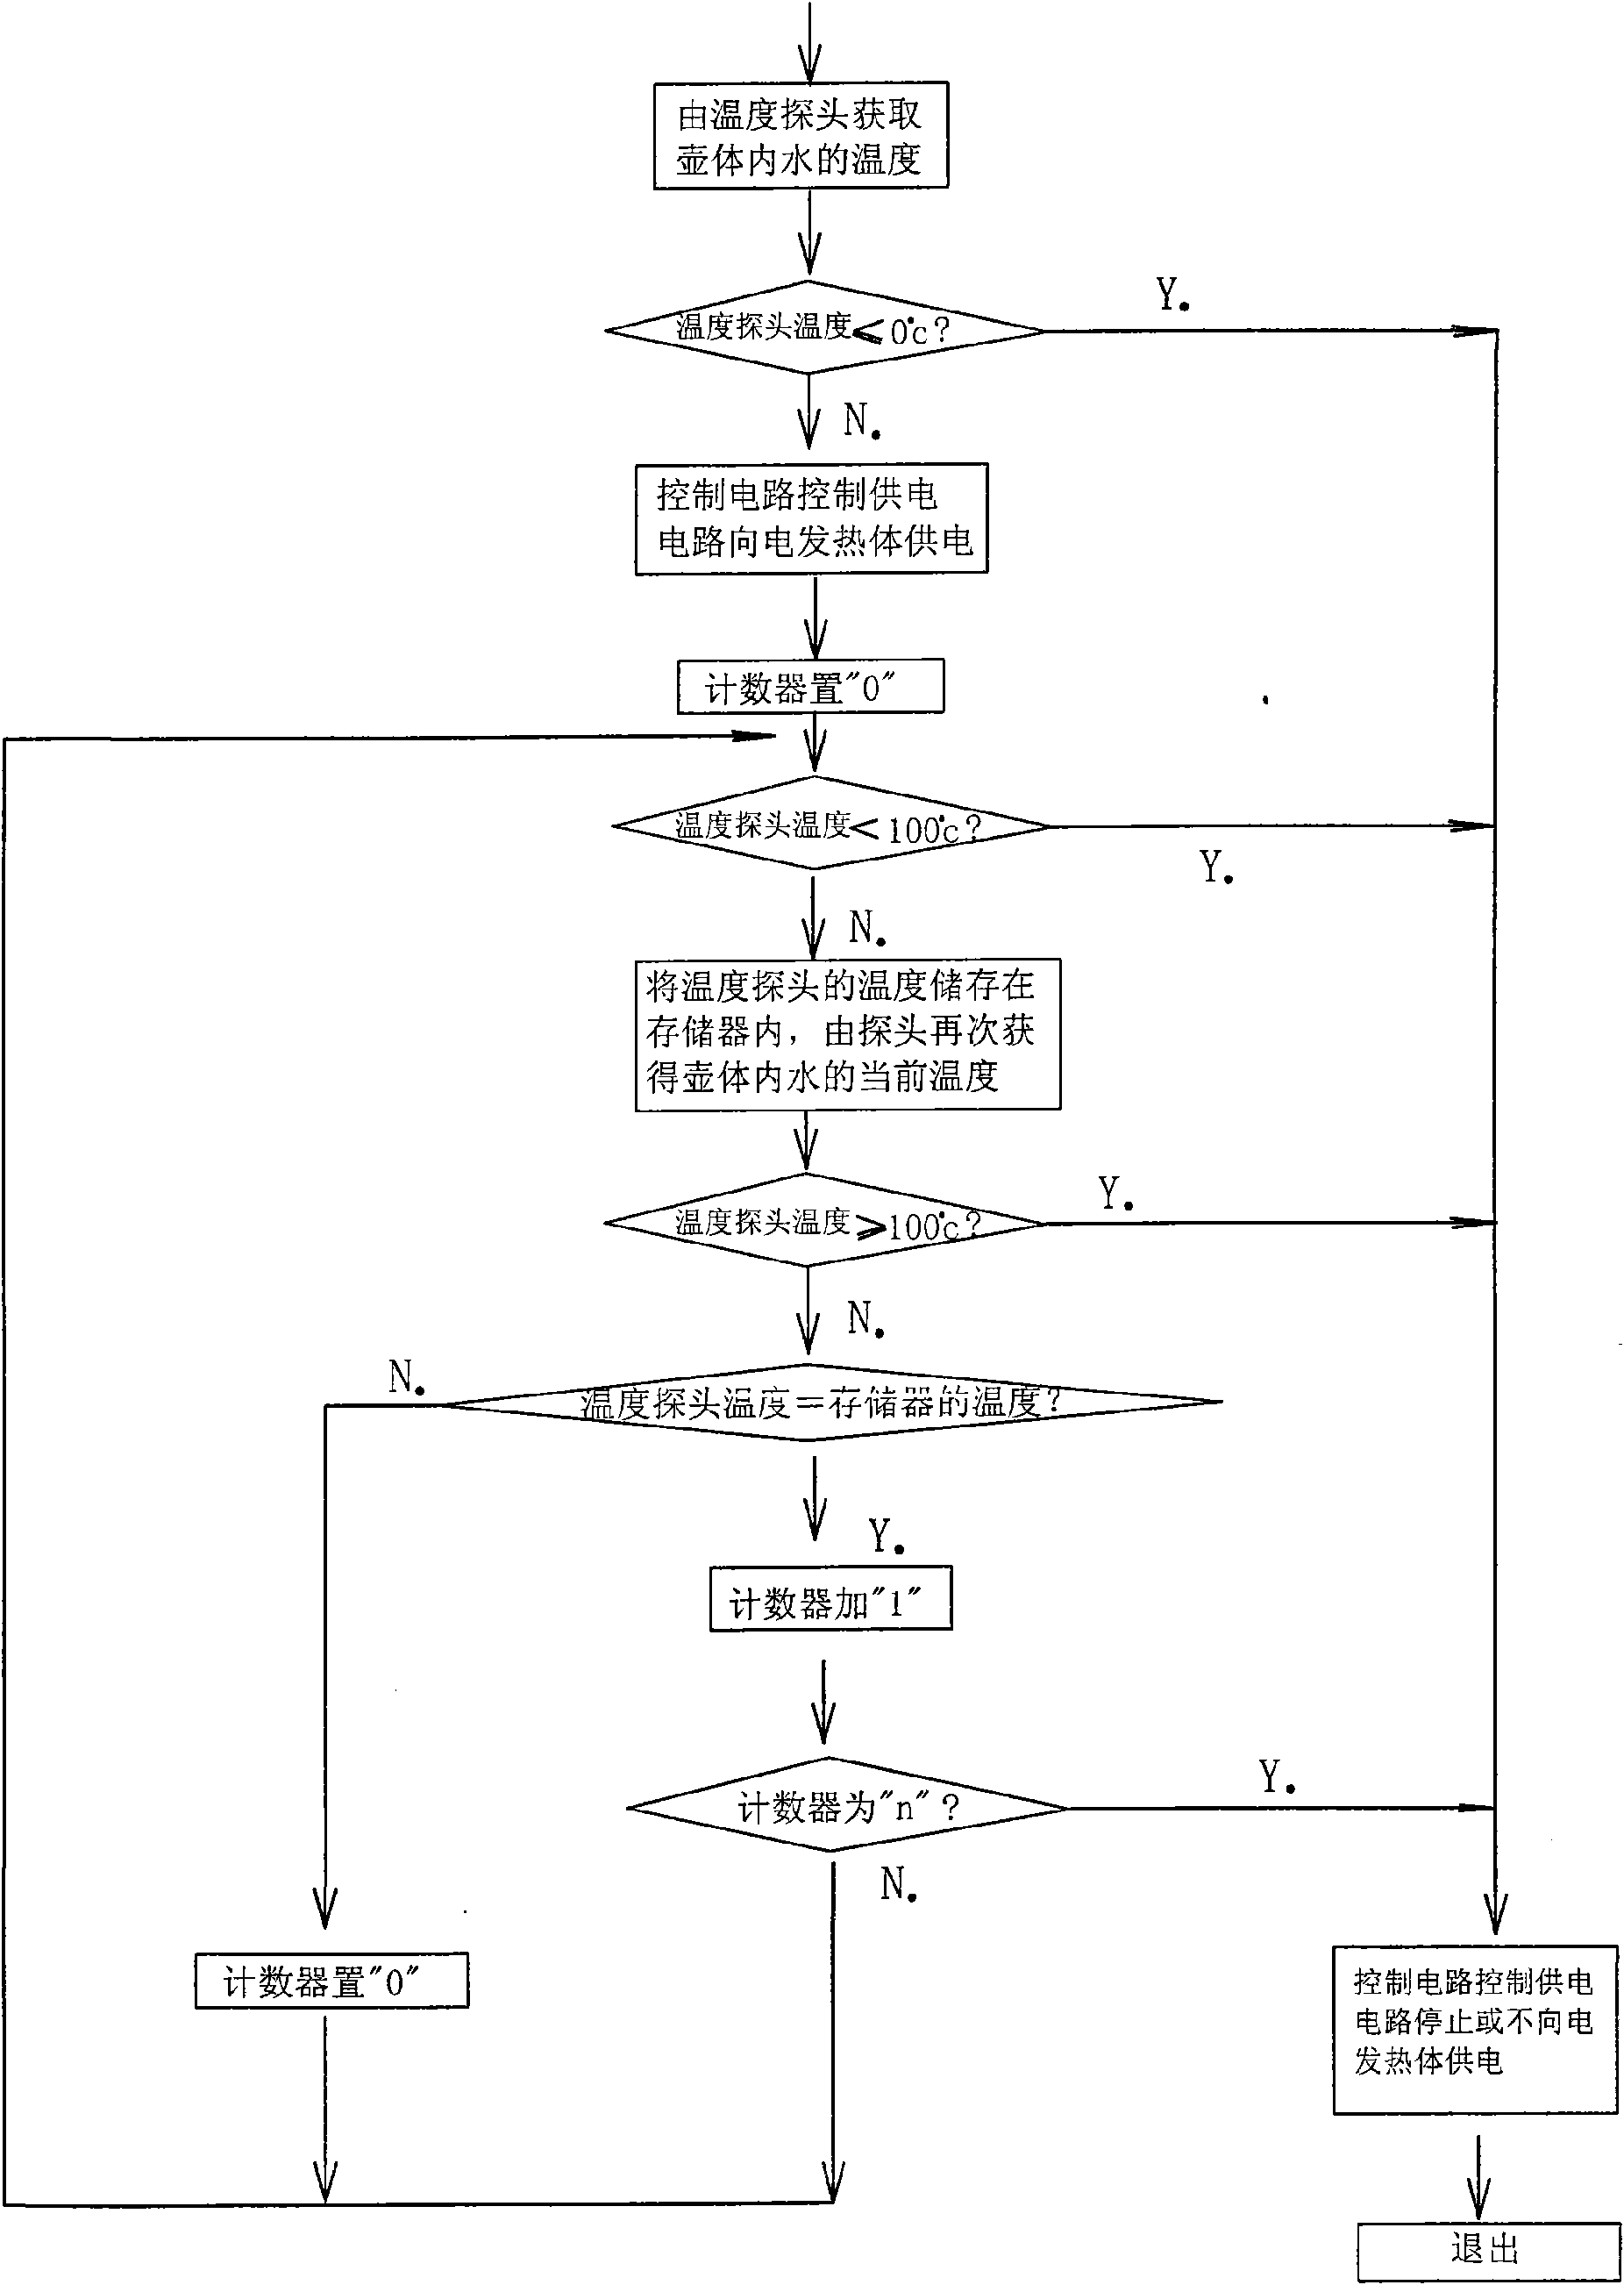 Control method for water boiling of electric kettle